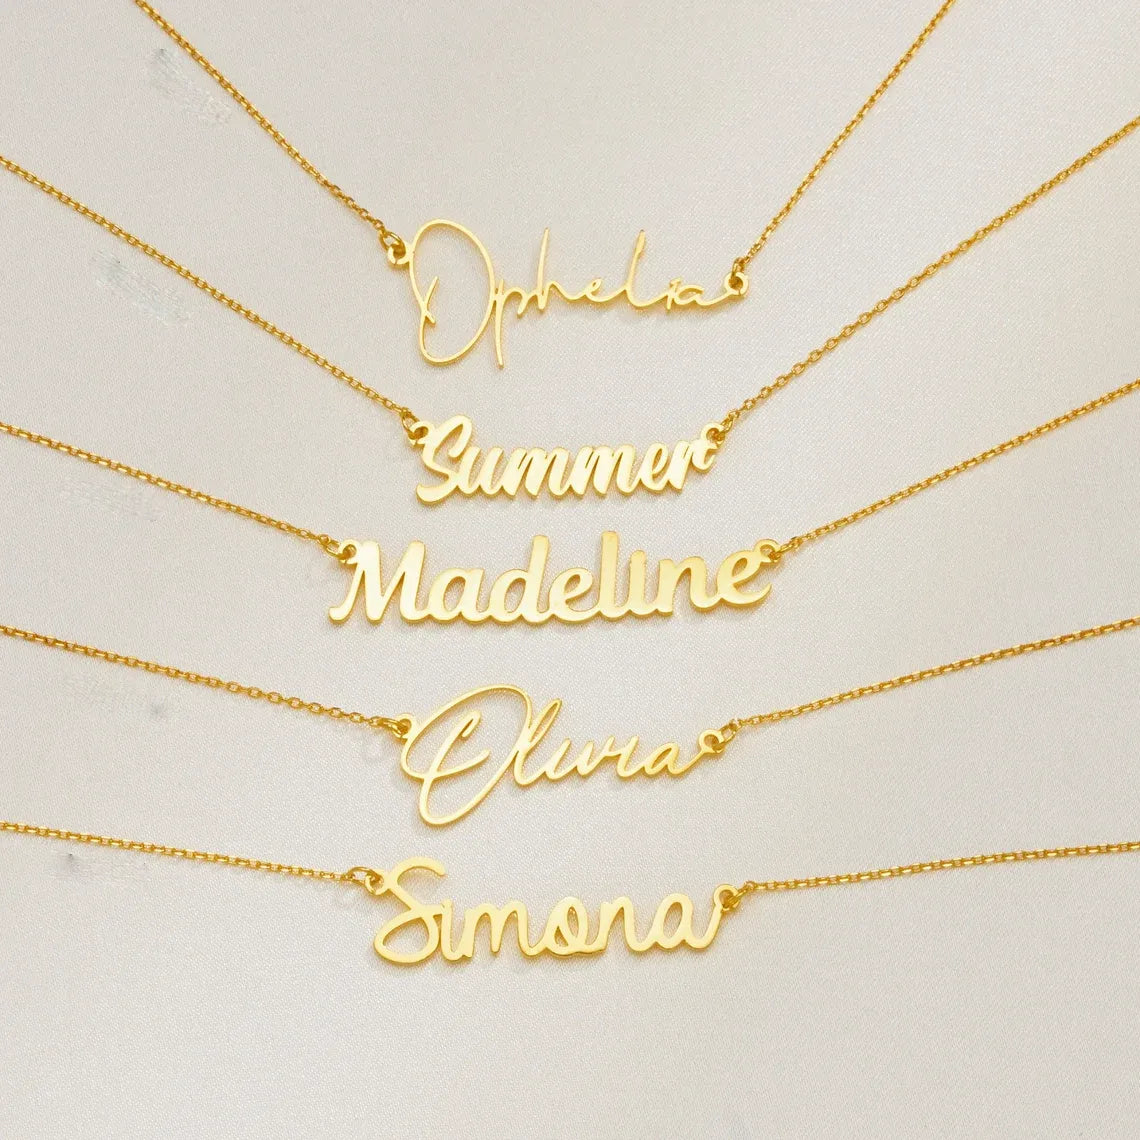 Luxury Elegant Stainless Steel Gold and Rose Gold Personalized Name Cursive Letter Pendant Necklace for Women Men